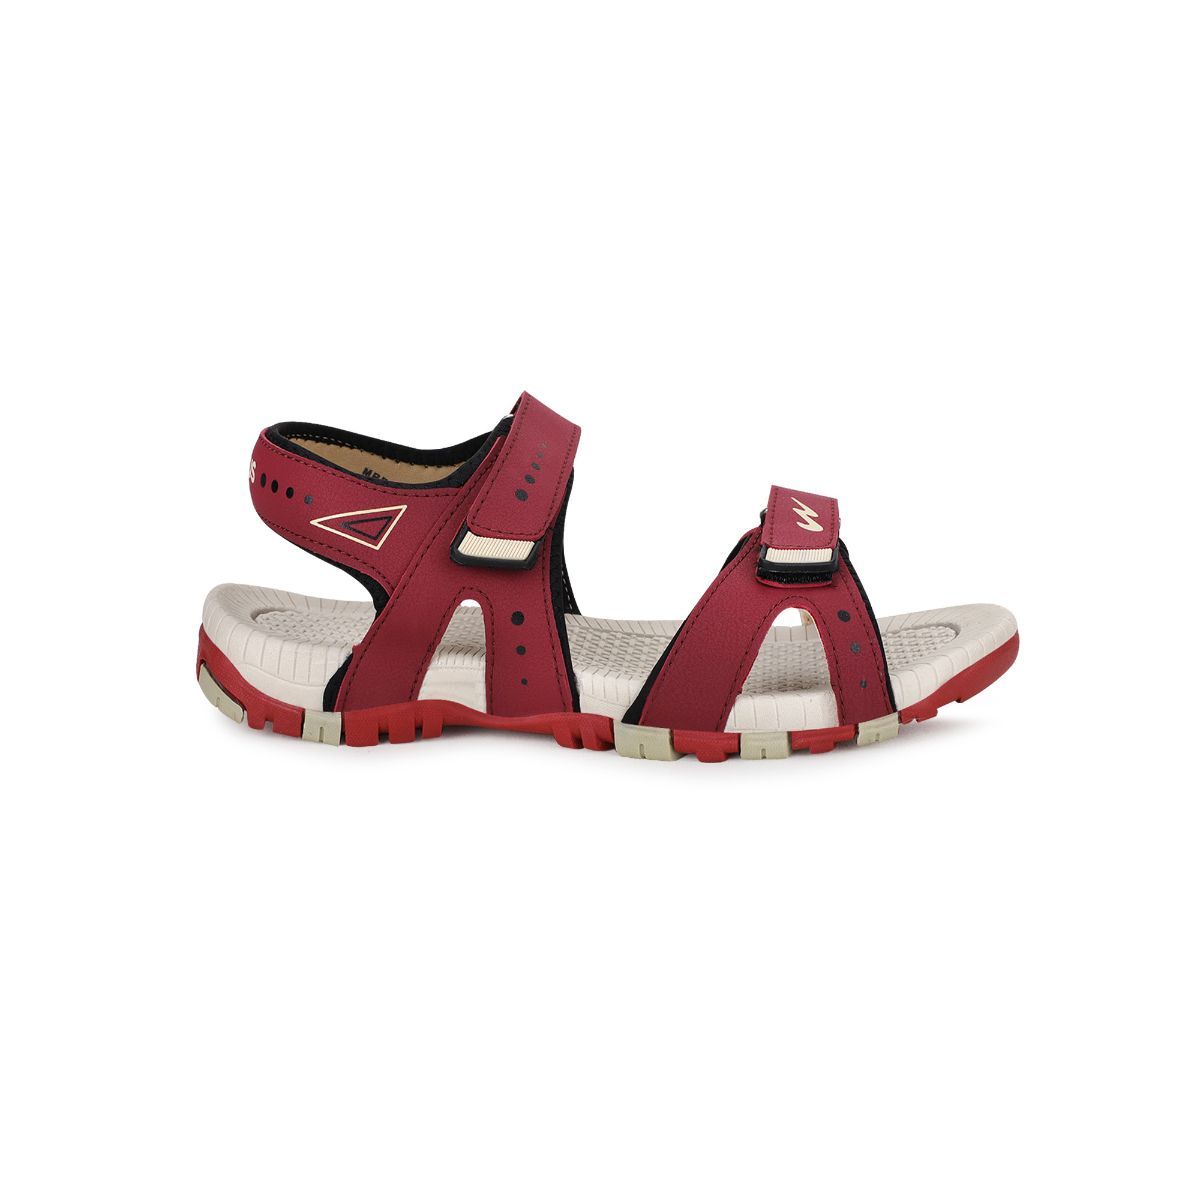 Buy Sandals For Child: Gc-22925C-Rst-Crm | Campus Shoes